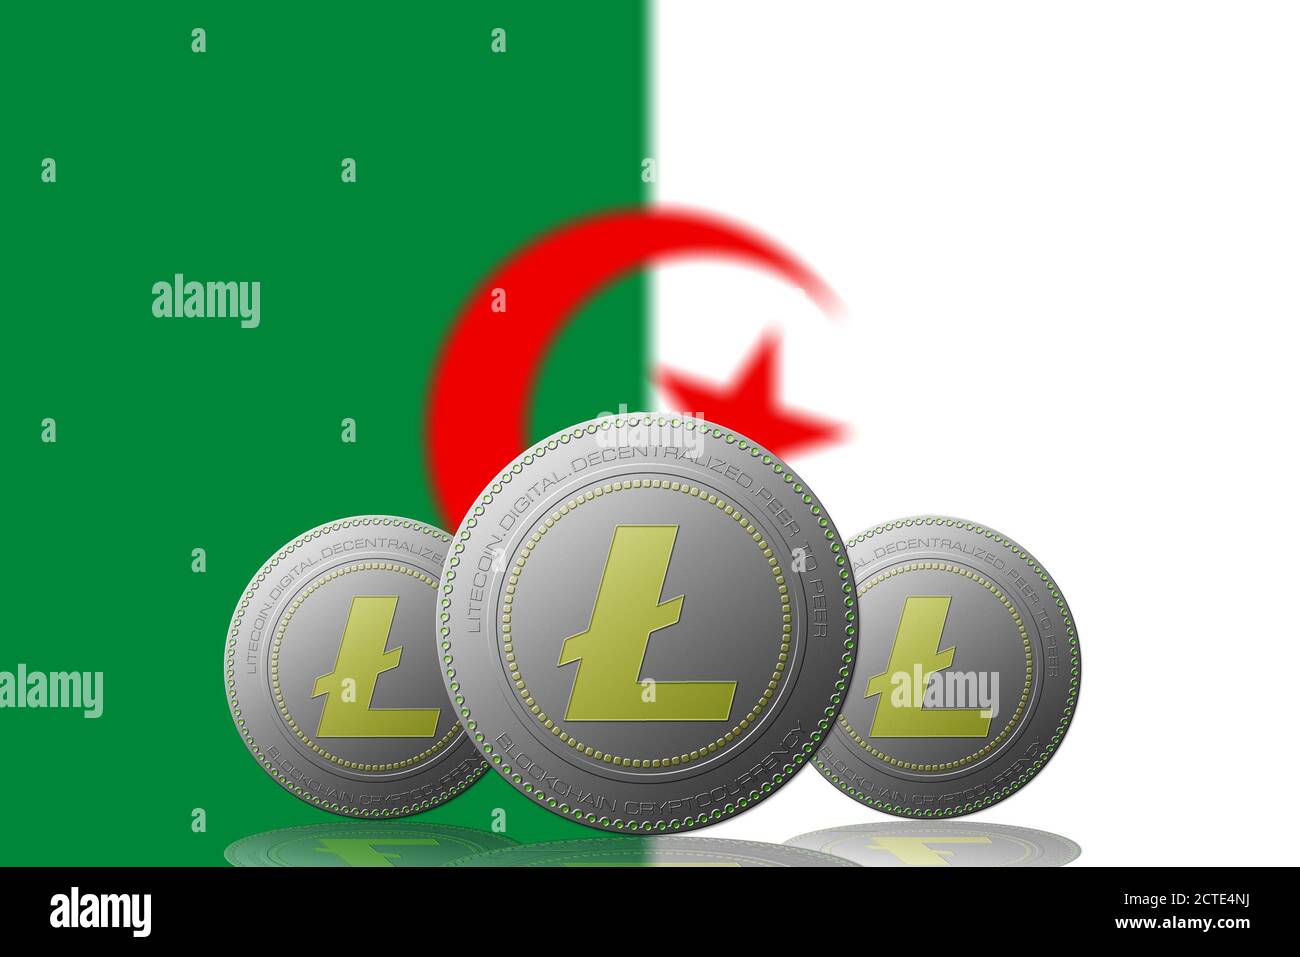 3D ILLUSTRATION Three LITECOIN cryptocurrency with ALGERIA flag on background. Stock Photo